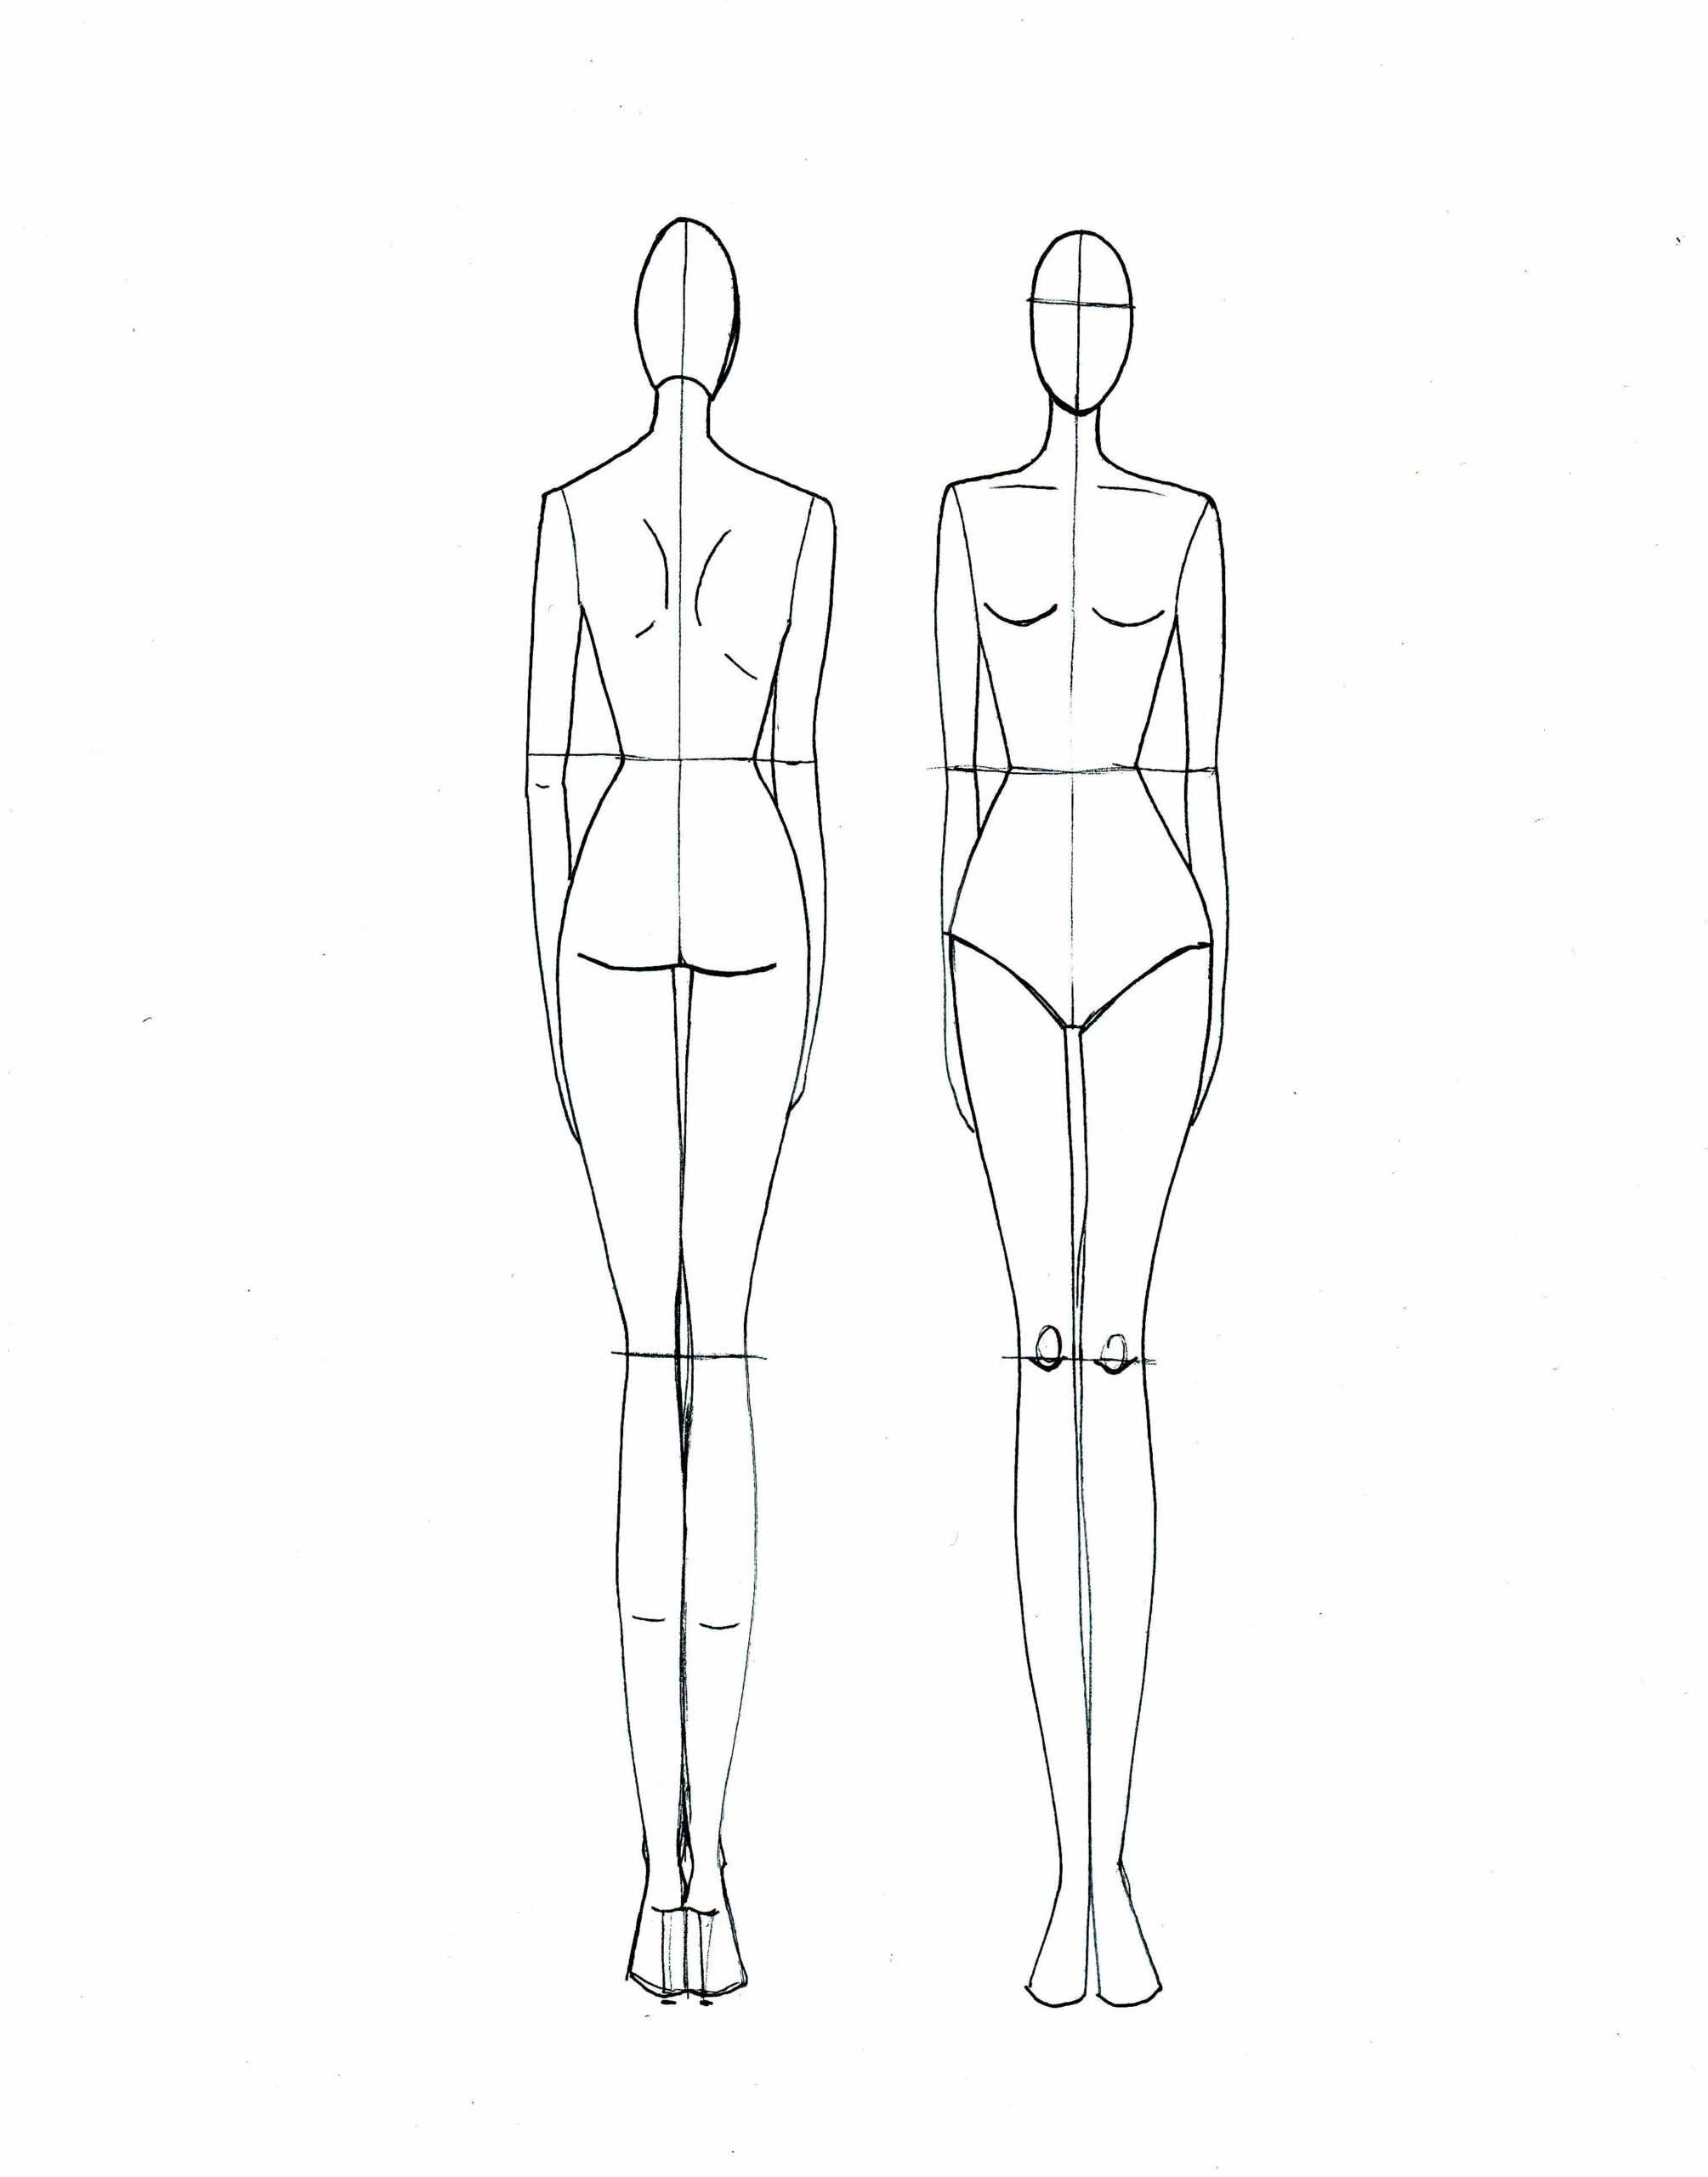 Body Sketch Template At Paintingvalley | Explore With Regard To Blank Model Sketch Template